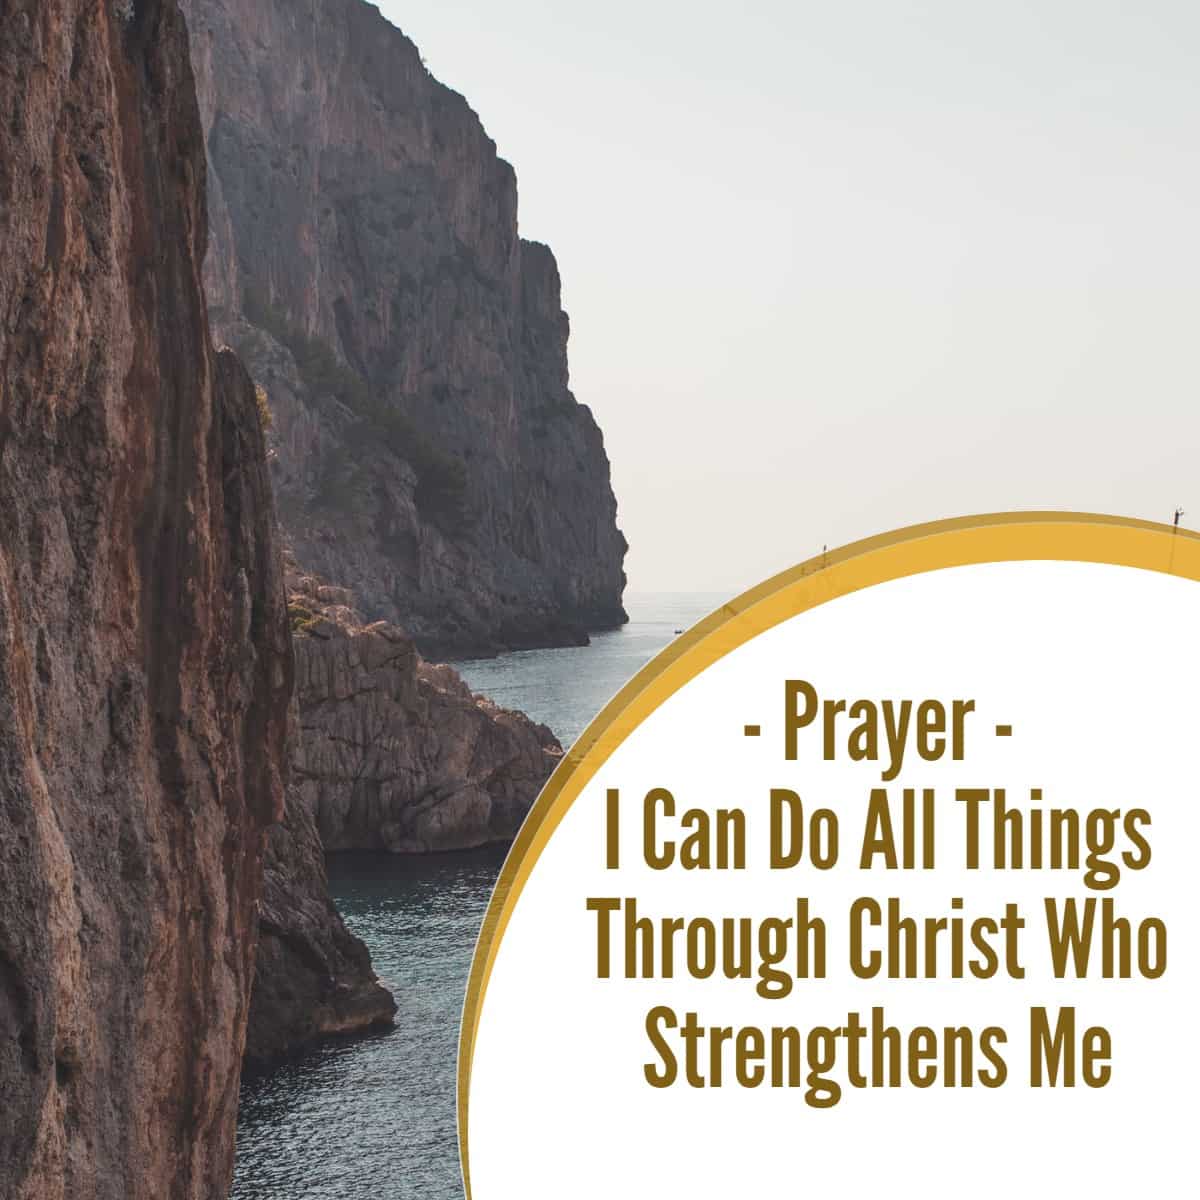 Prayer: I Can Do All Things Through Christ Who Strengthens Me